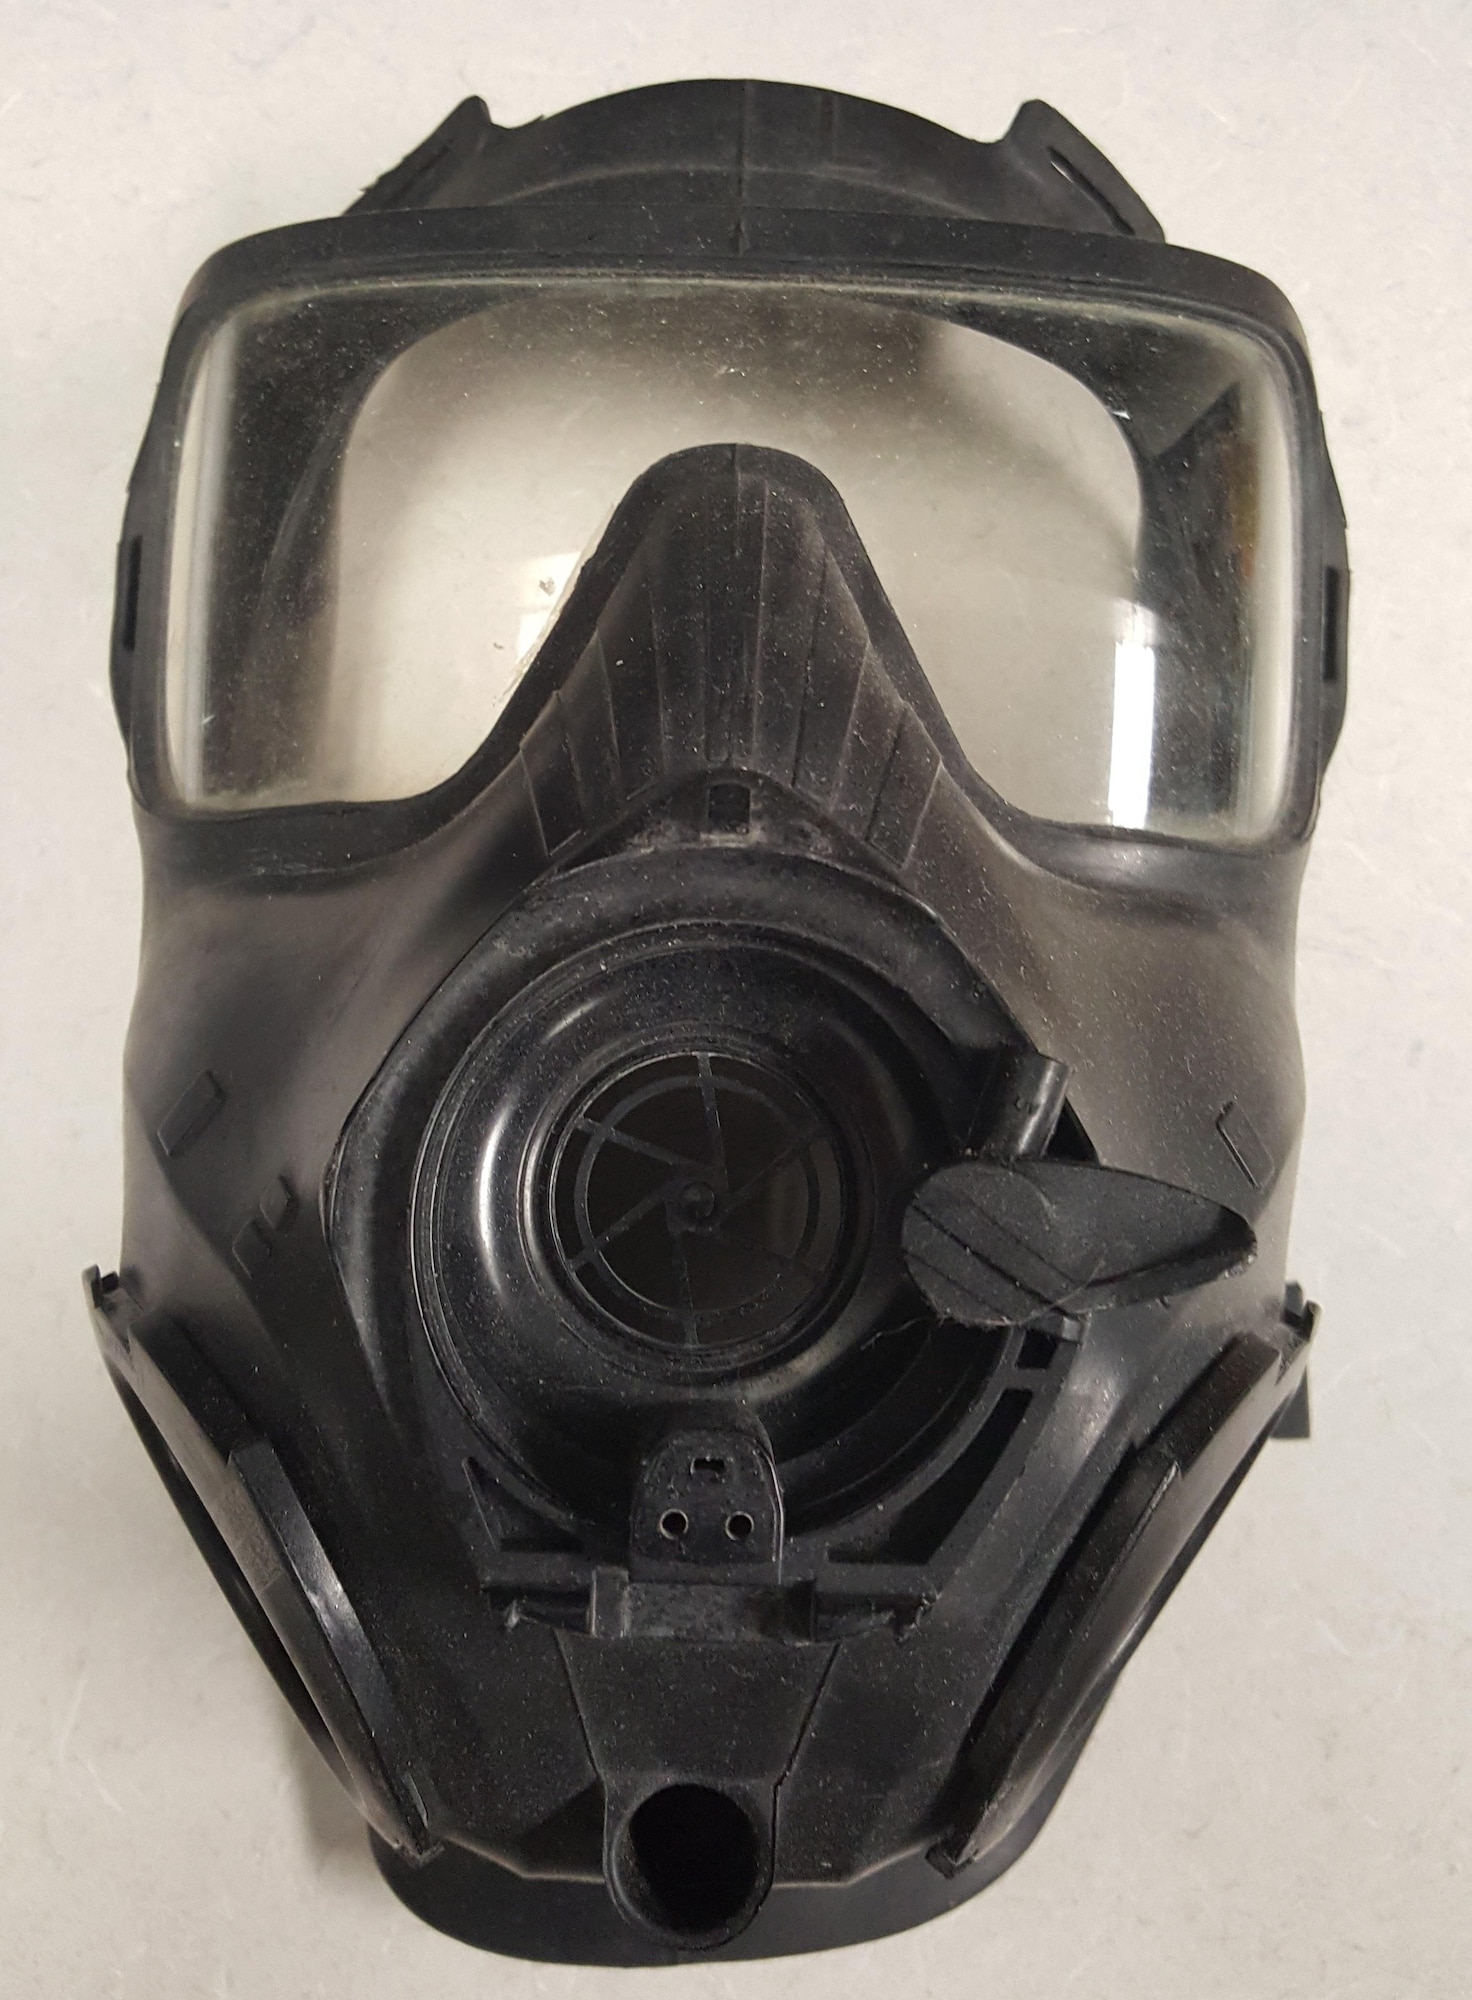 A typical M50 mask before being cleaned and sanitized. (U.S. Air Force photo)